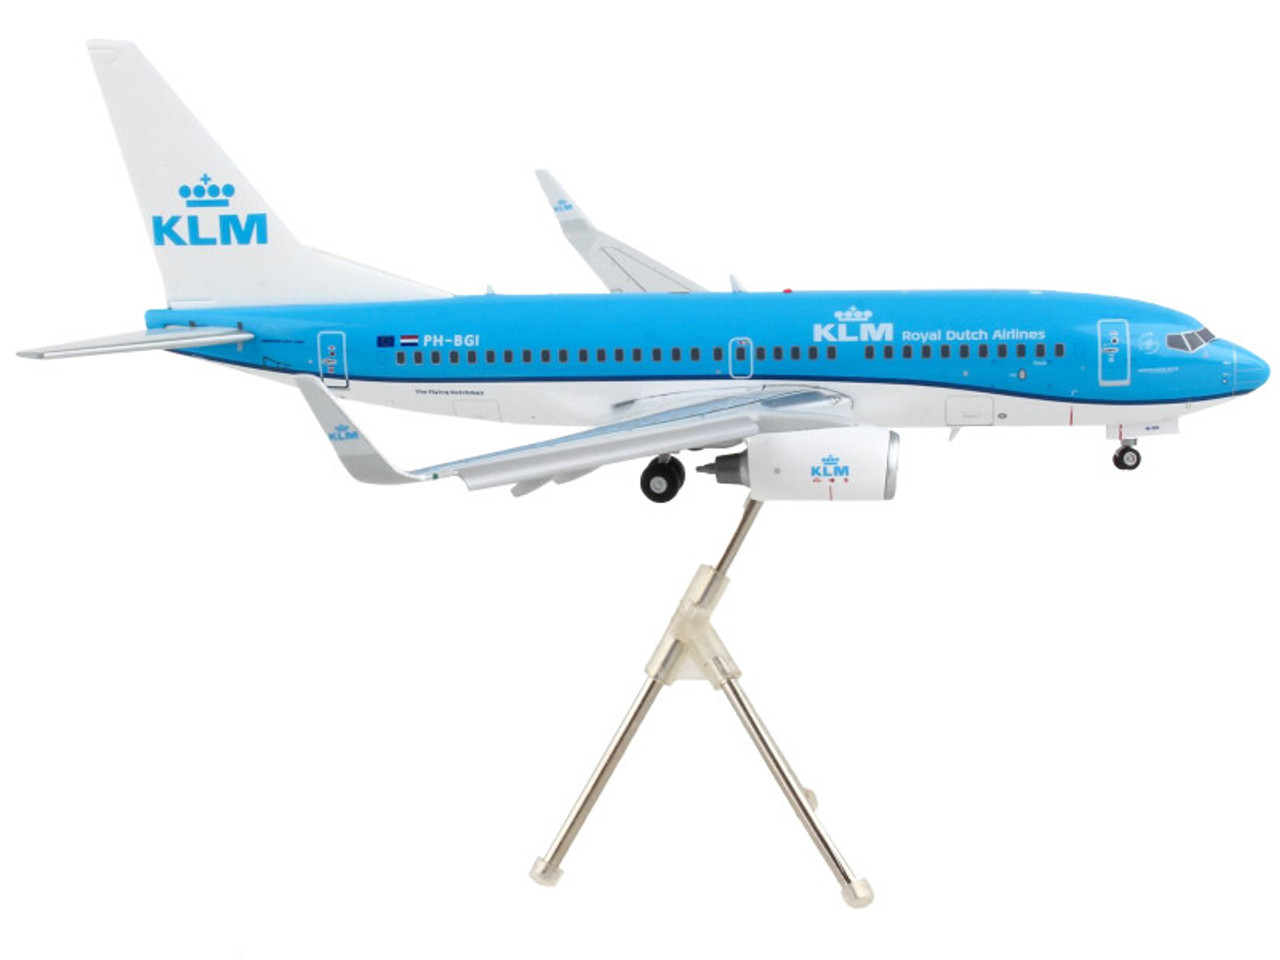 Boeing 737-700 Commercial Aircraft with Flaps Down "KLM Royal Dutch Airlines" Blue with White Tail "Gemini 200" Series 1/200 Diecast Model Airplane by GeminiJets